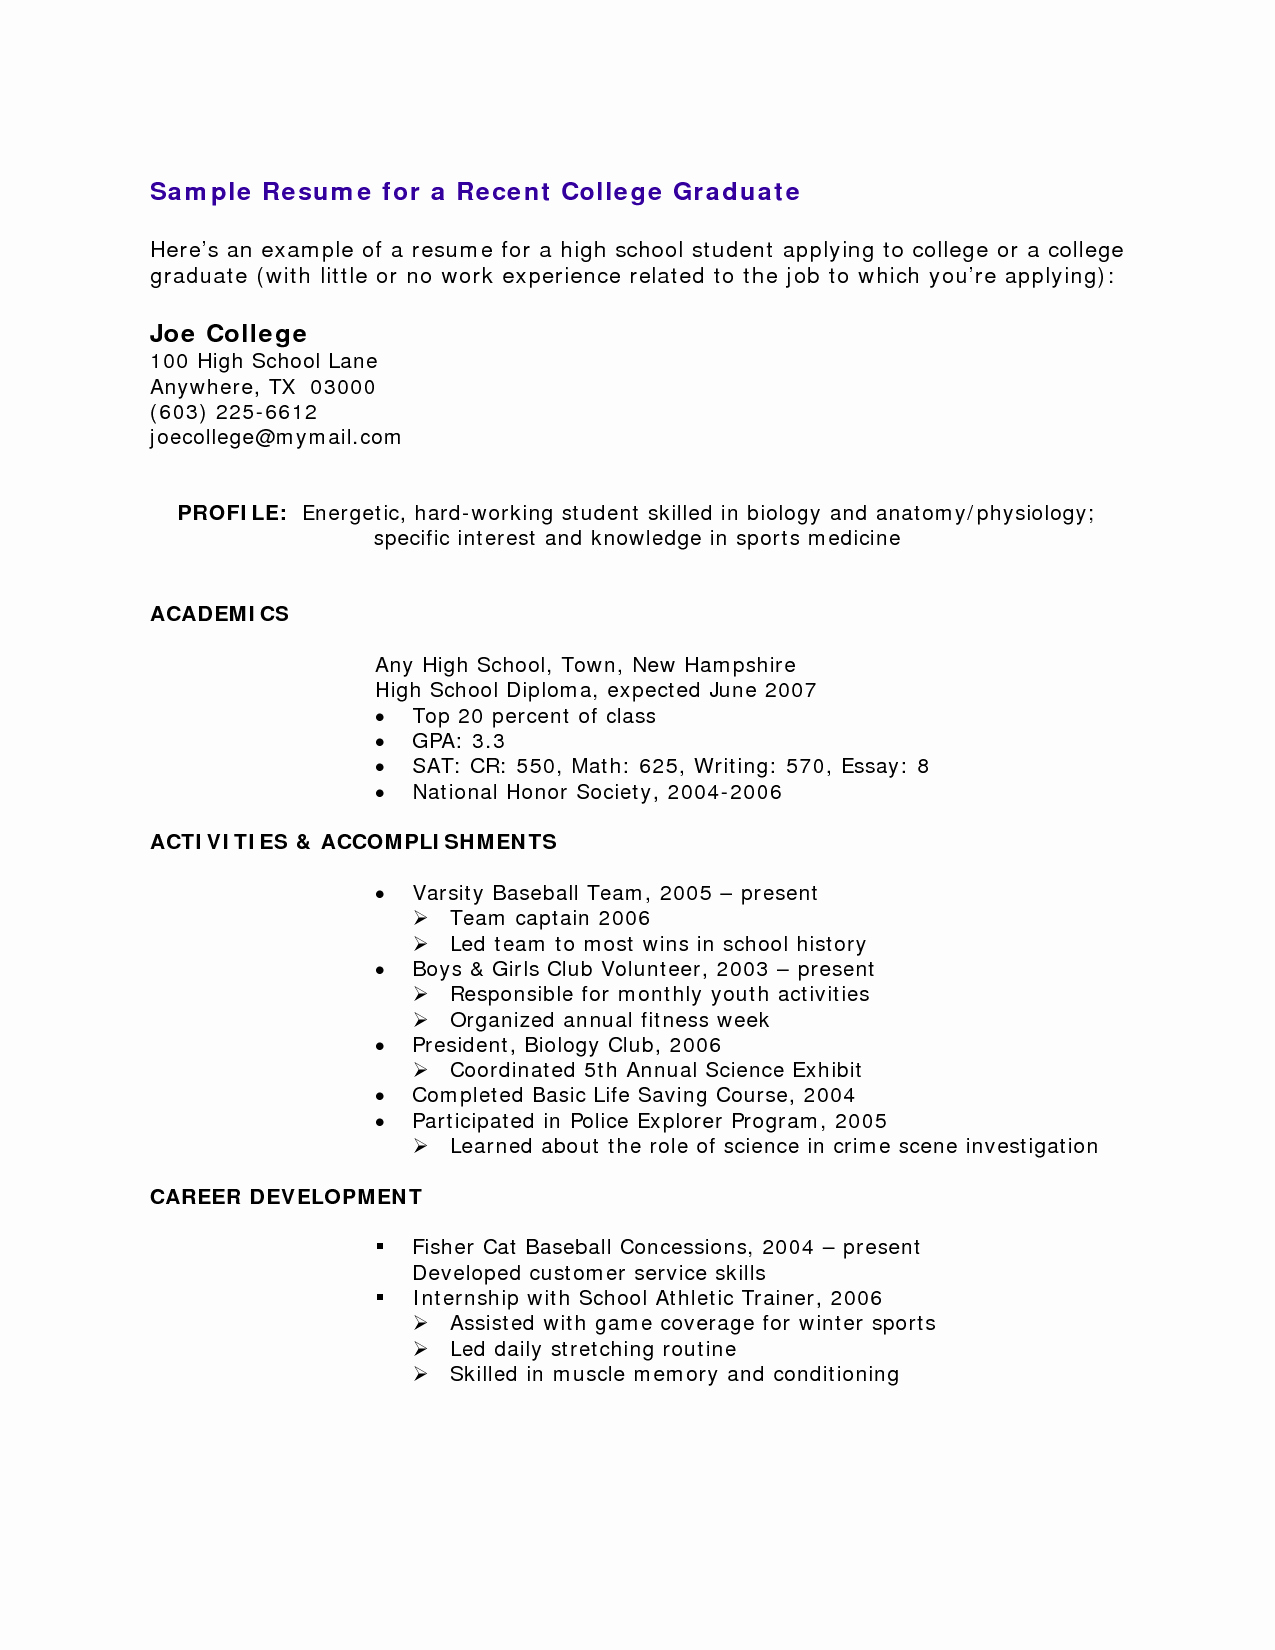 Resumes Samples for High School Students with No